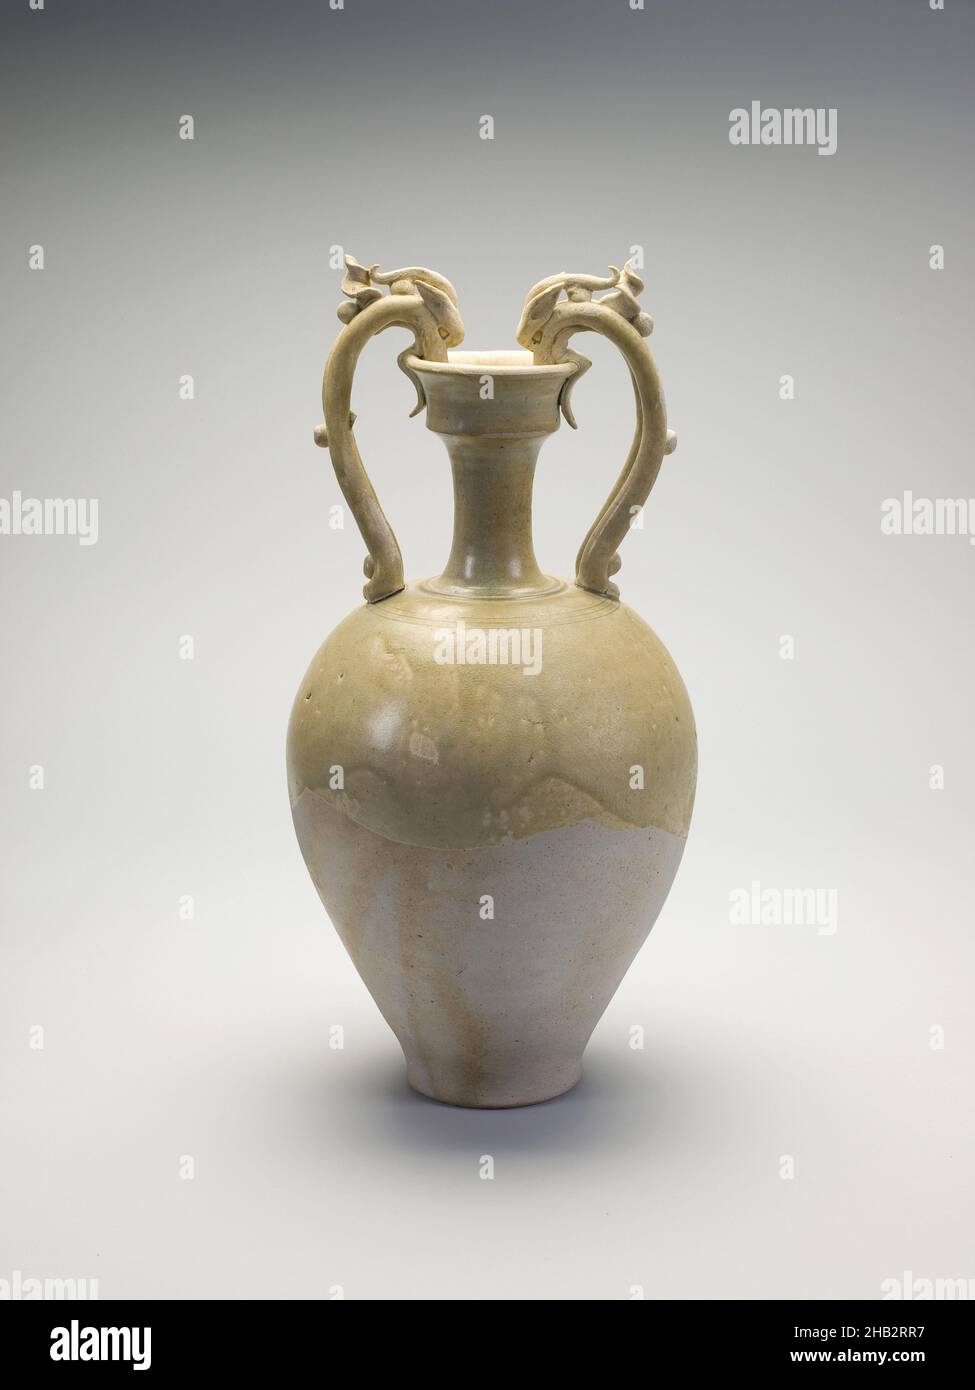 Chinese Amphora High Resolution Stock Photography and Images - Alamy